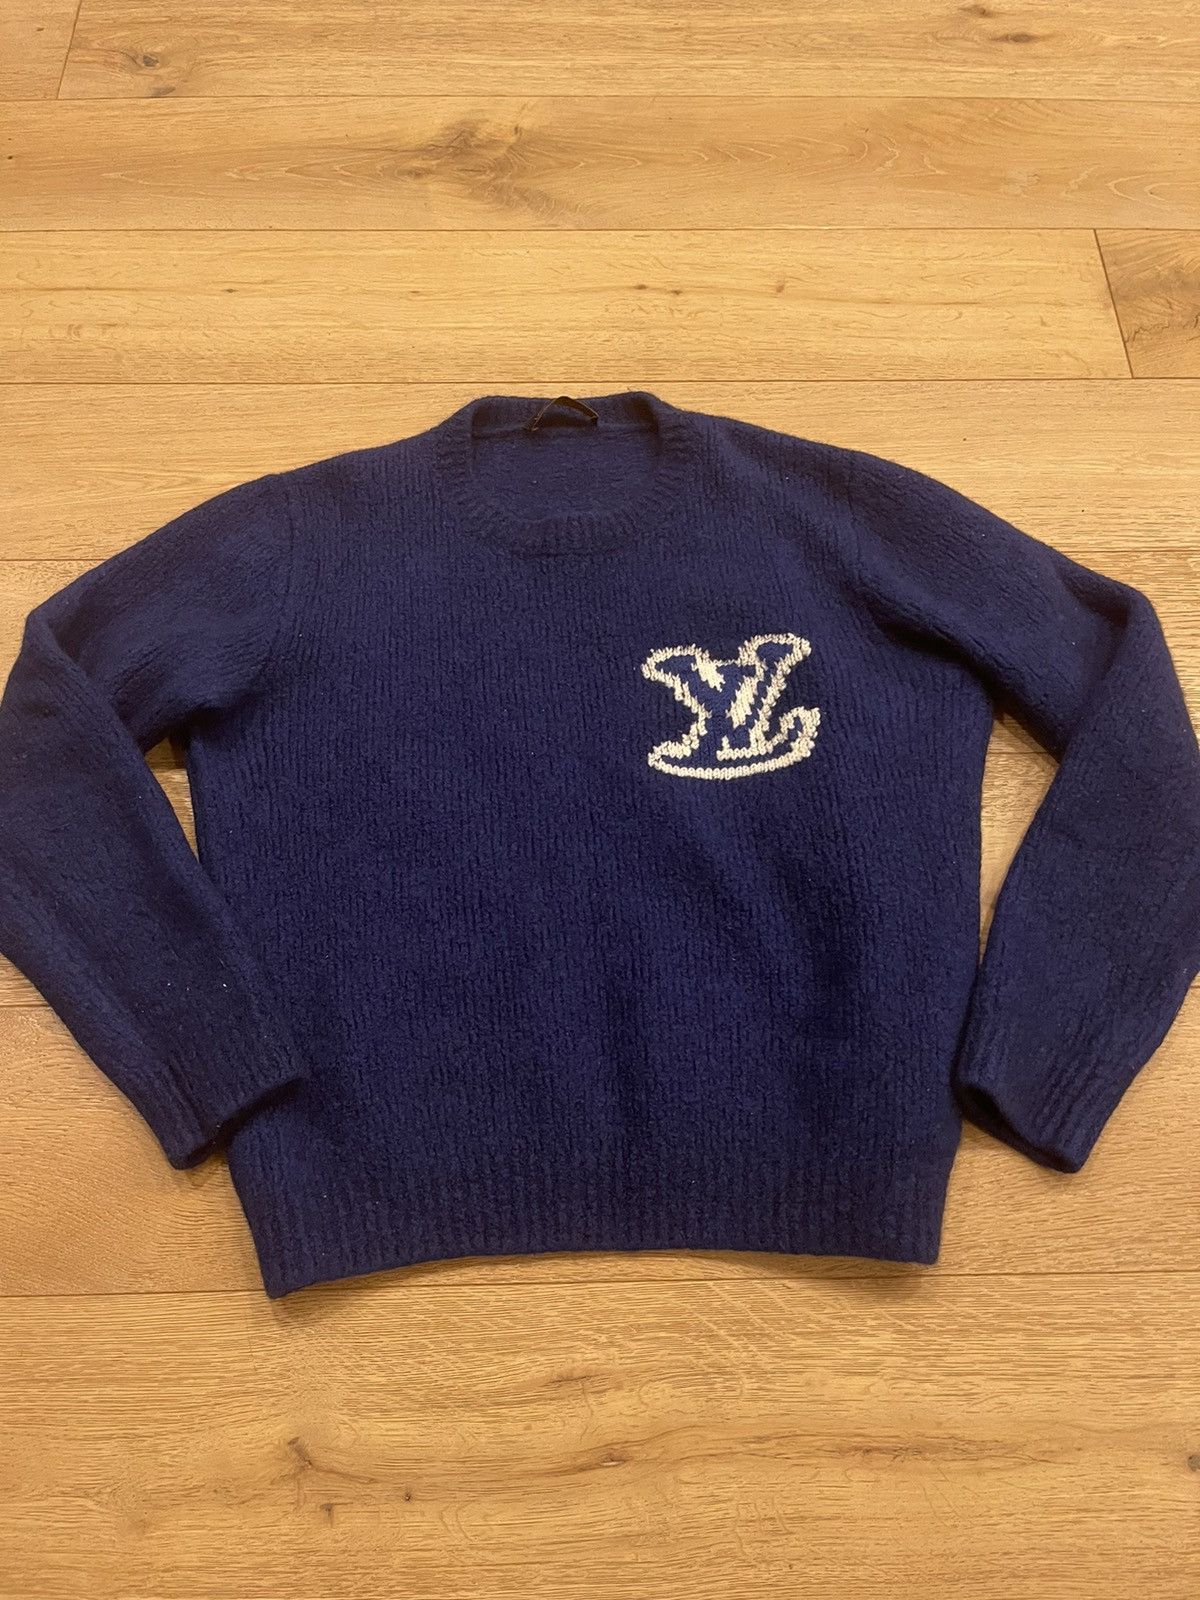 Louis Vuitton 2020 LV Logo Intarsia Pullover w/ Tags - Blue Sweaters,  Clothing - LOU487166